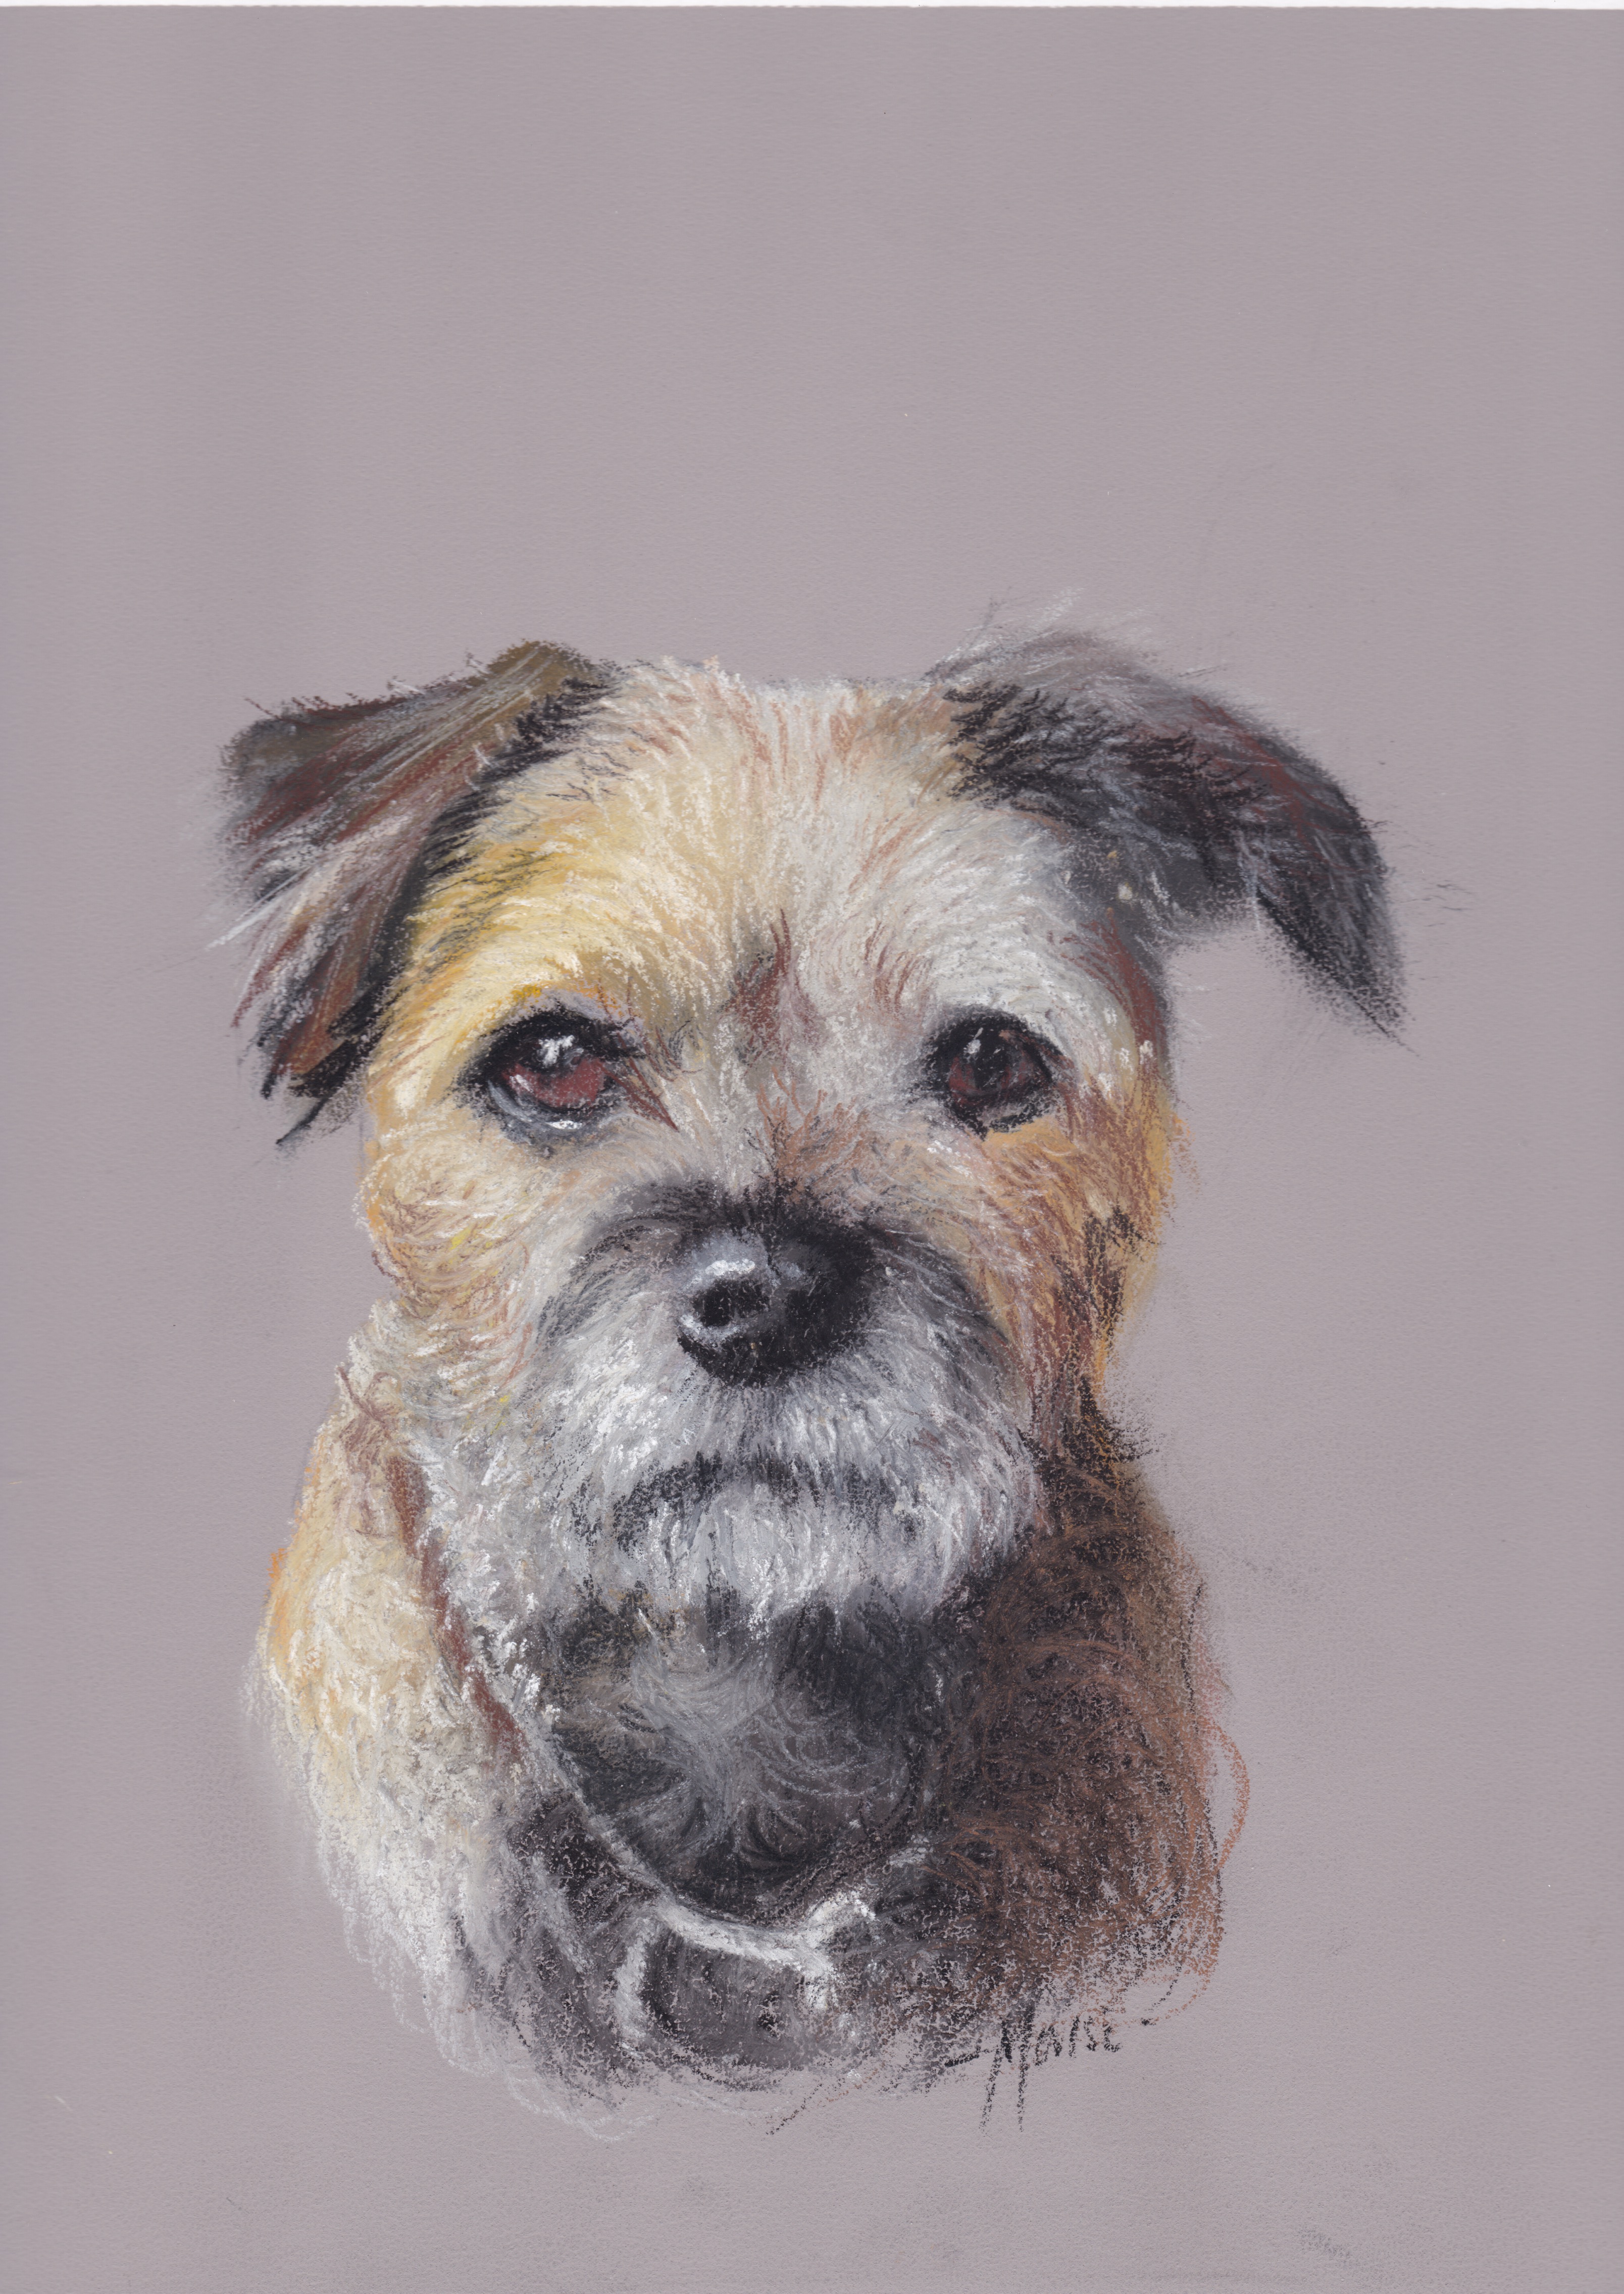 "Border Terrier" by David 'Mouse' Cooper.